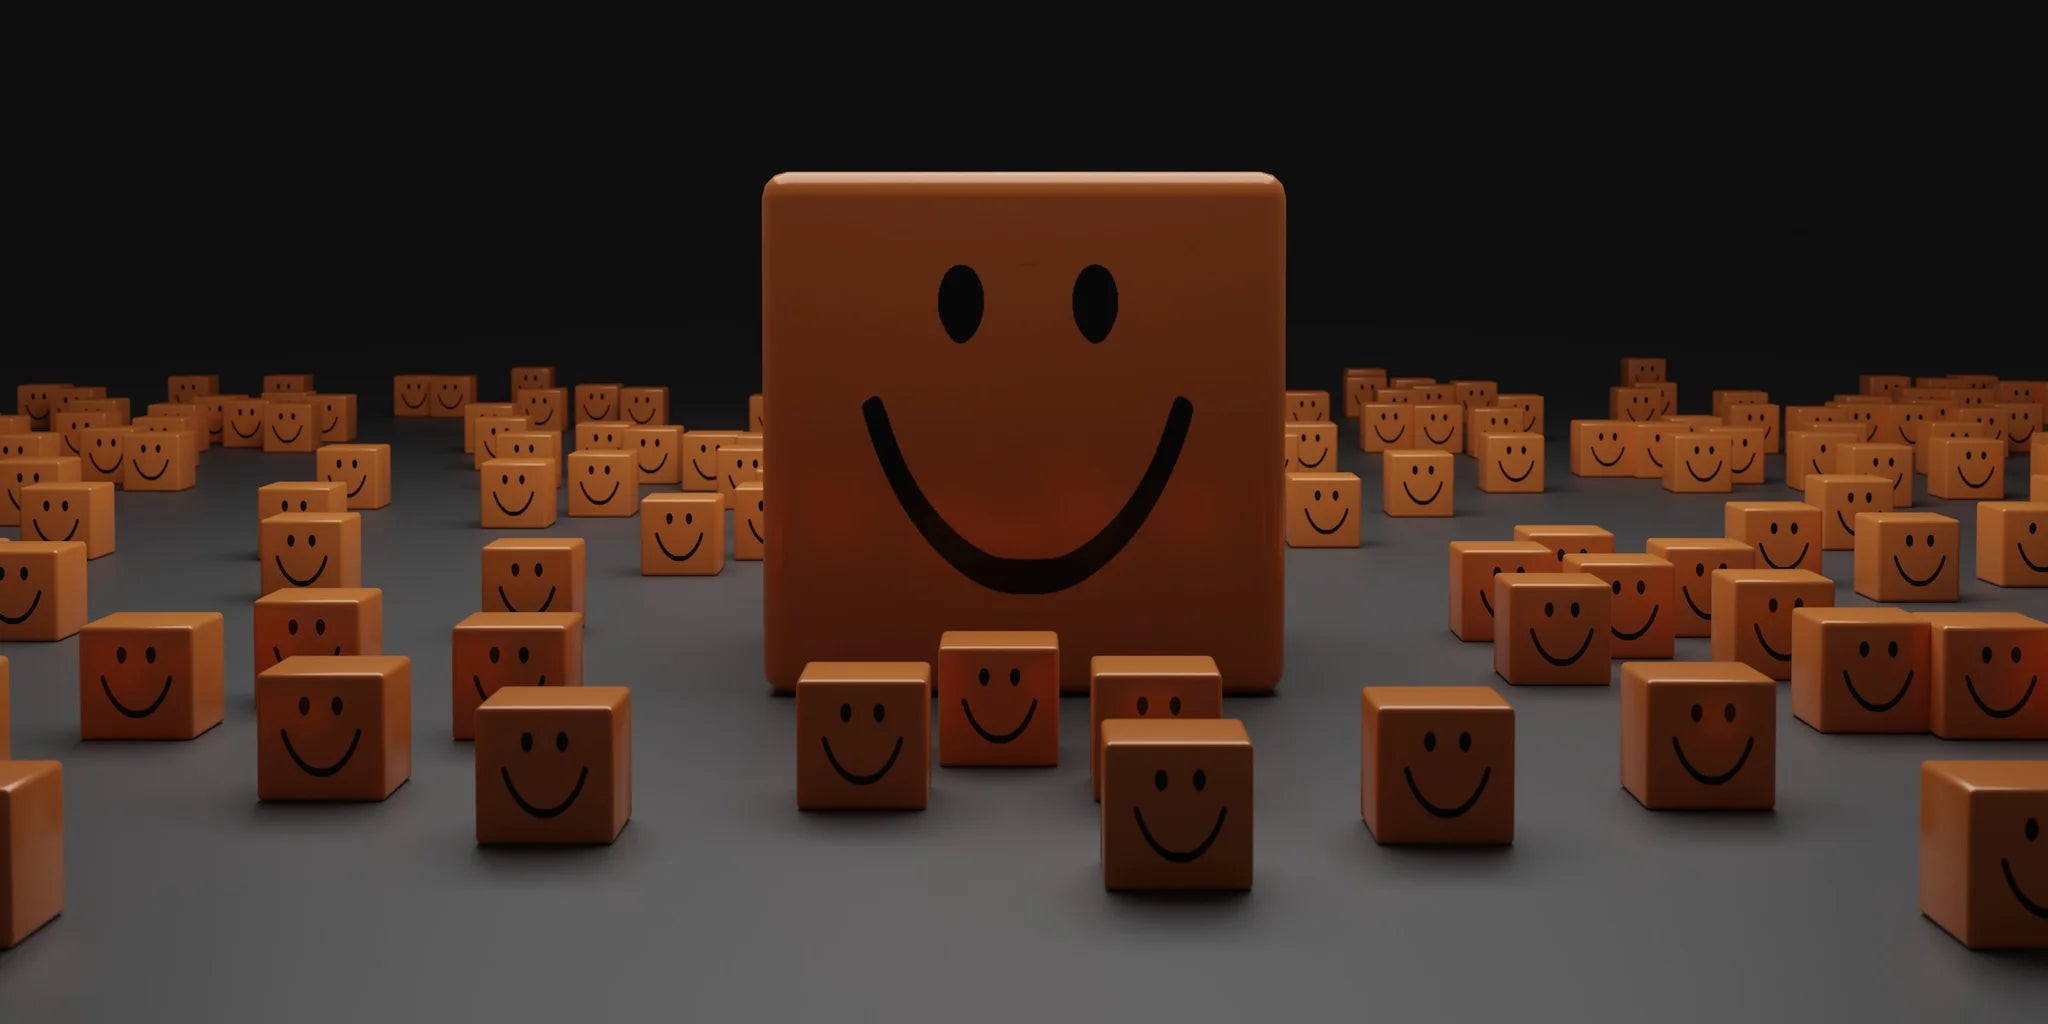 Smiley face widgets blocks on ground | WALL ART by Sonia